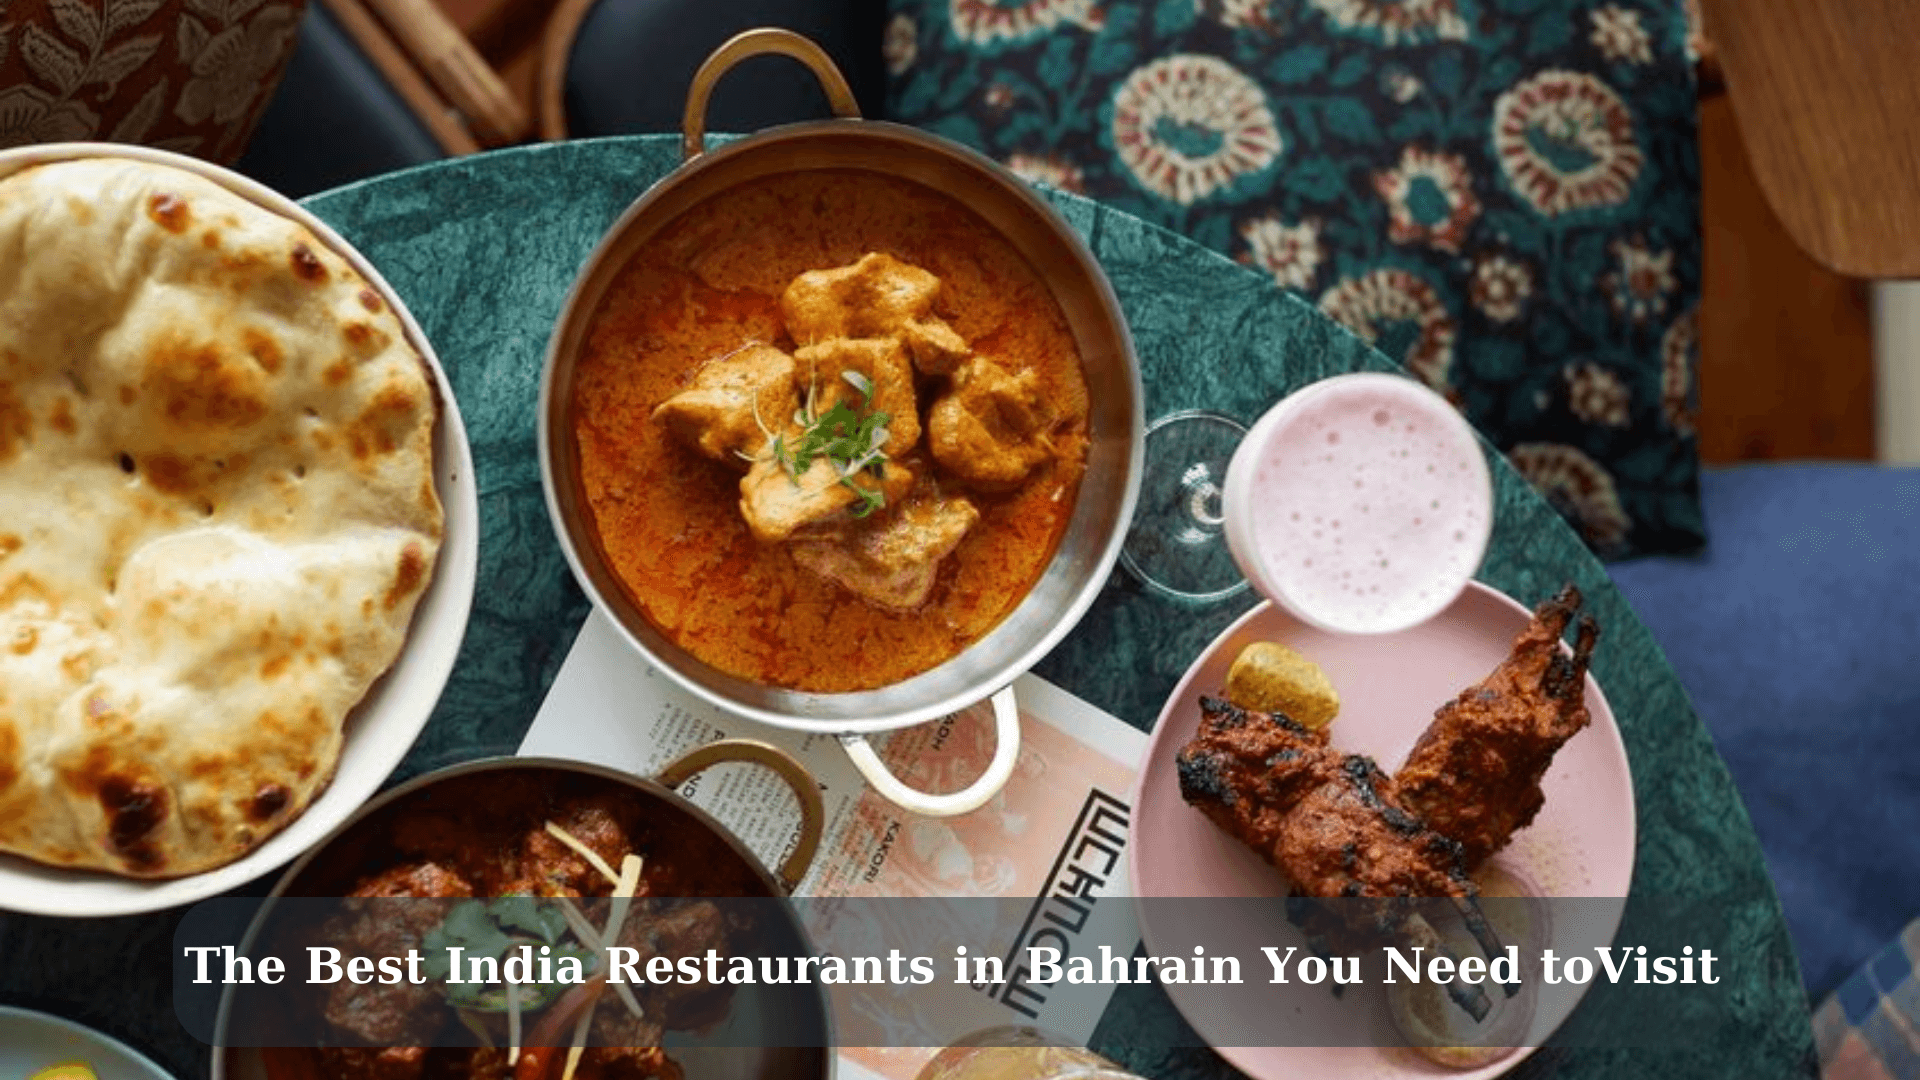 The Best 12 Indian Restaurants in Bahrain to Experience